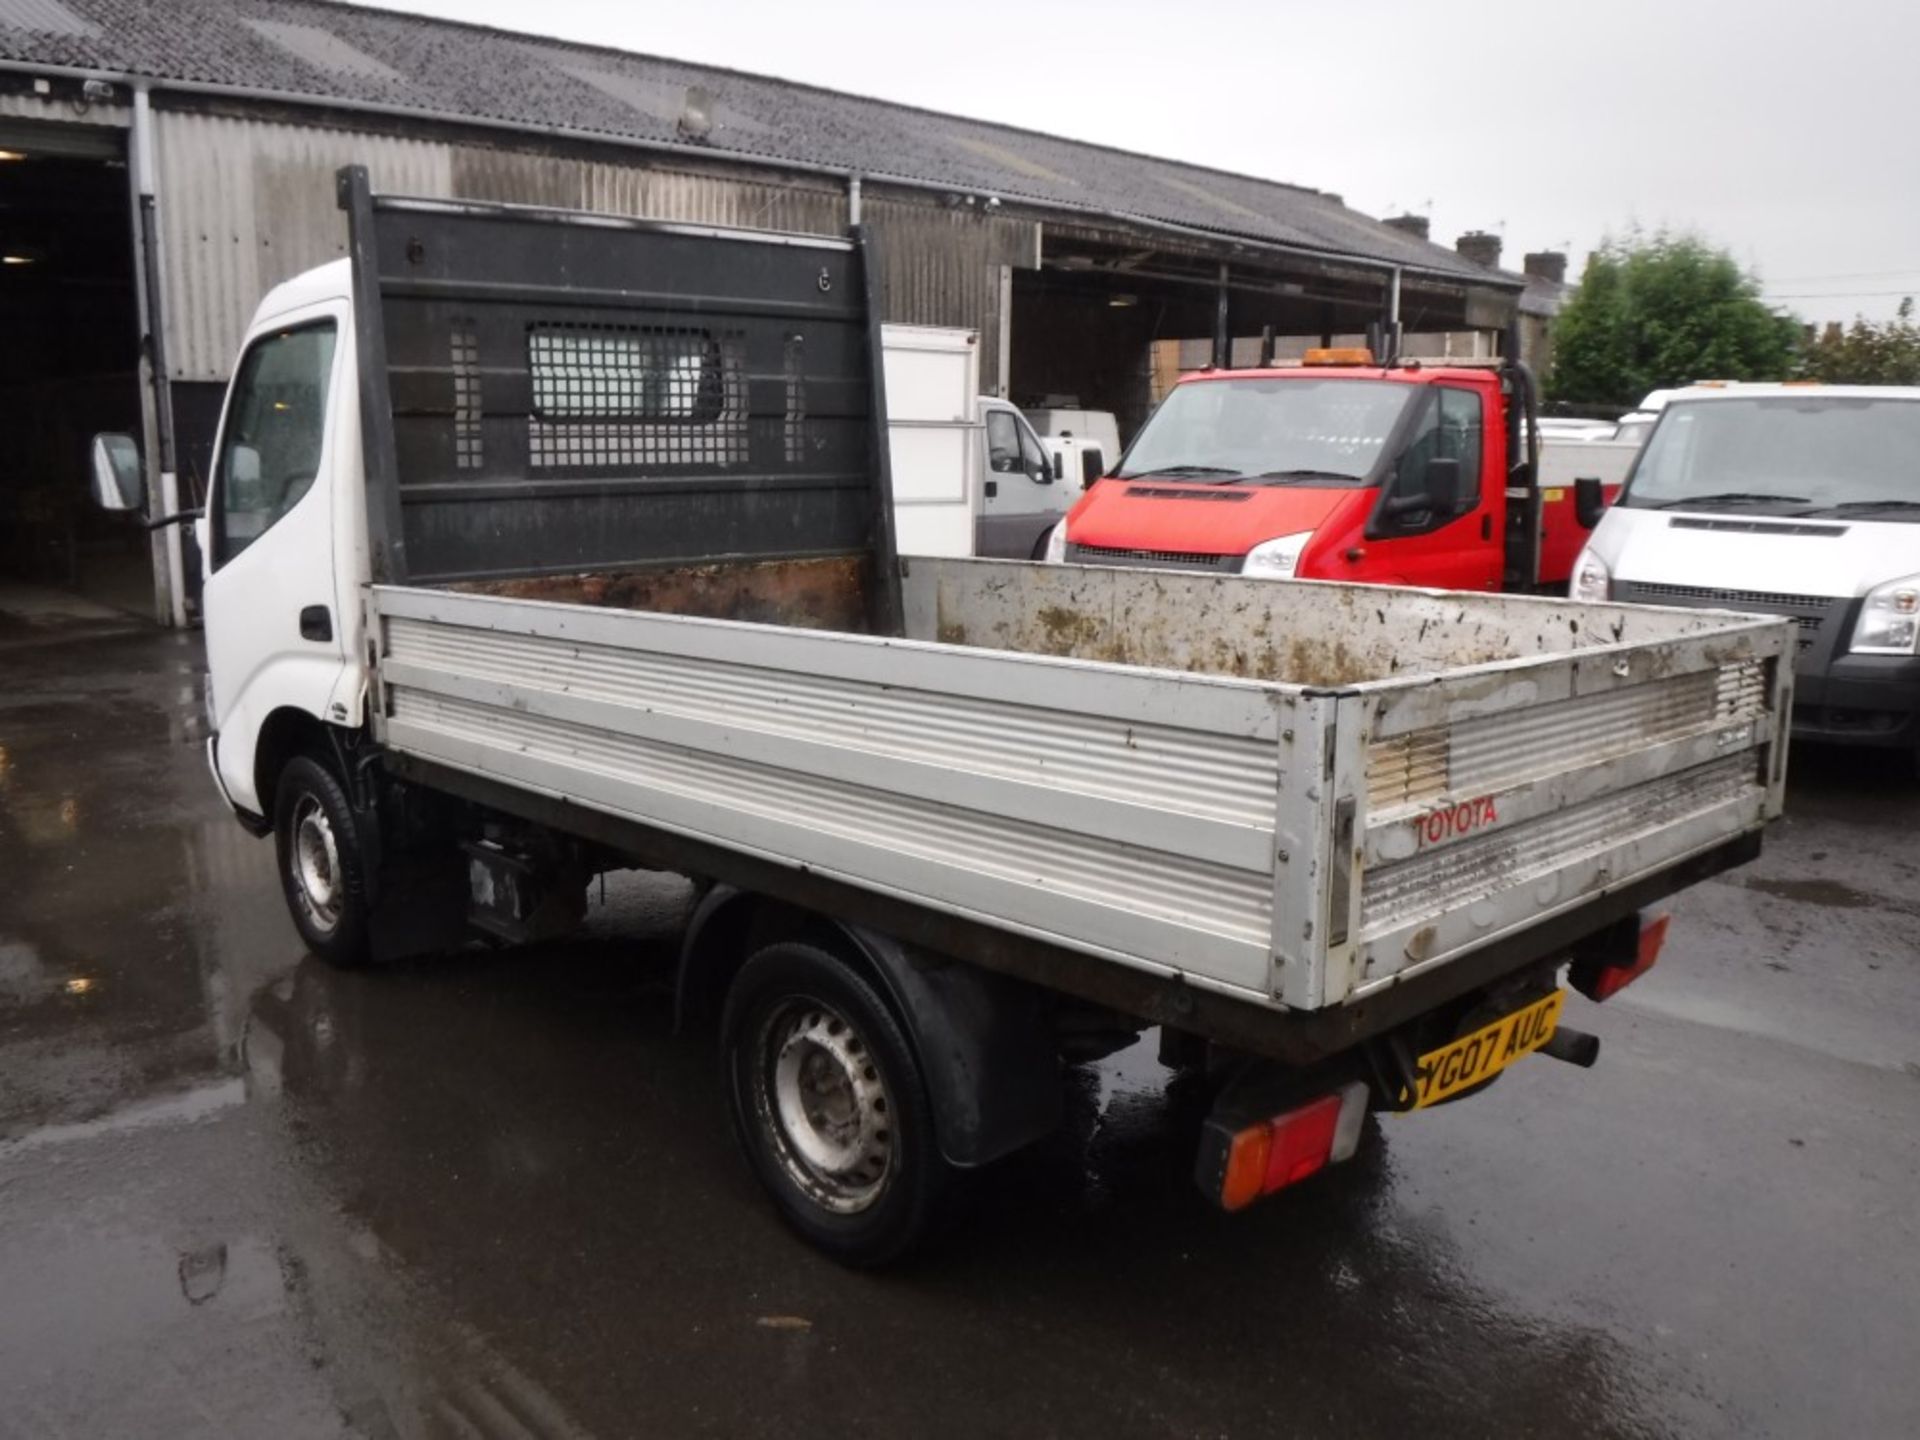 07 reg TOYOTA DYNA 300 D-4D DROPSIDE LORRY, 1ST REG 08/07, 100929M WARRANTED, V5 HERE, 1 OWNER - Image 3 of 5